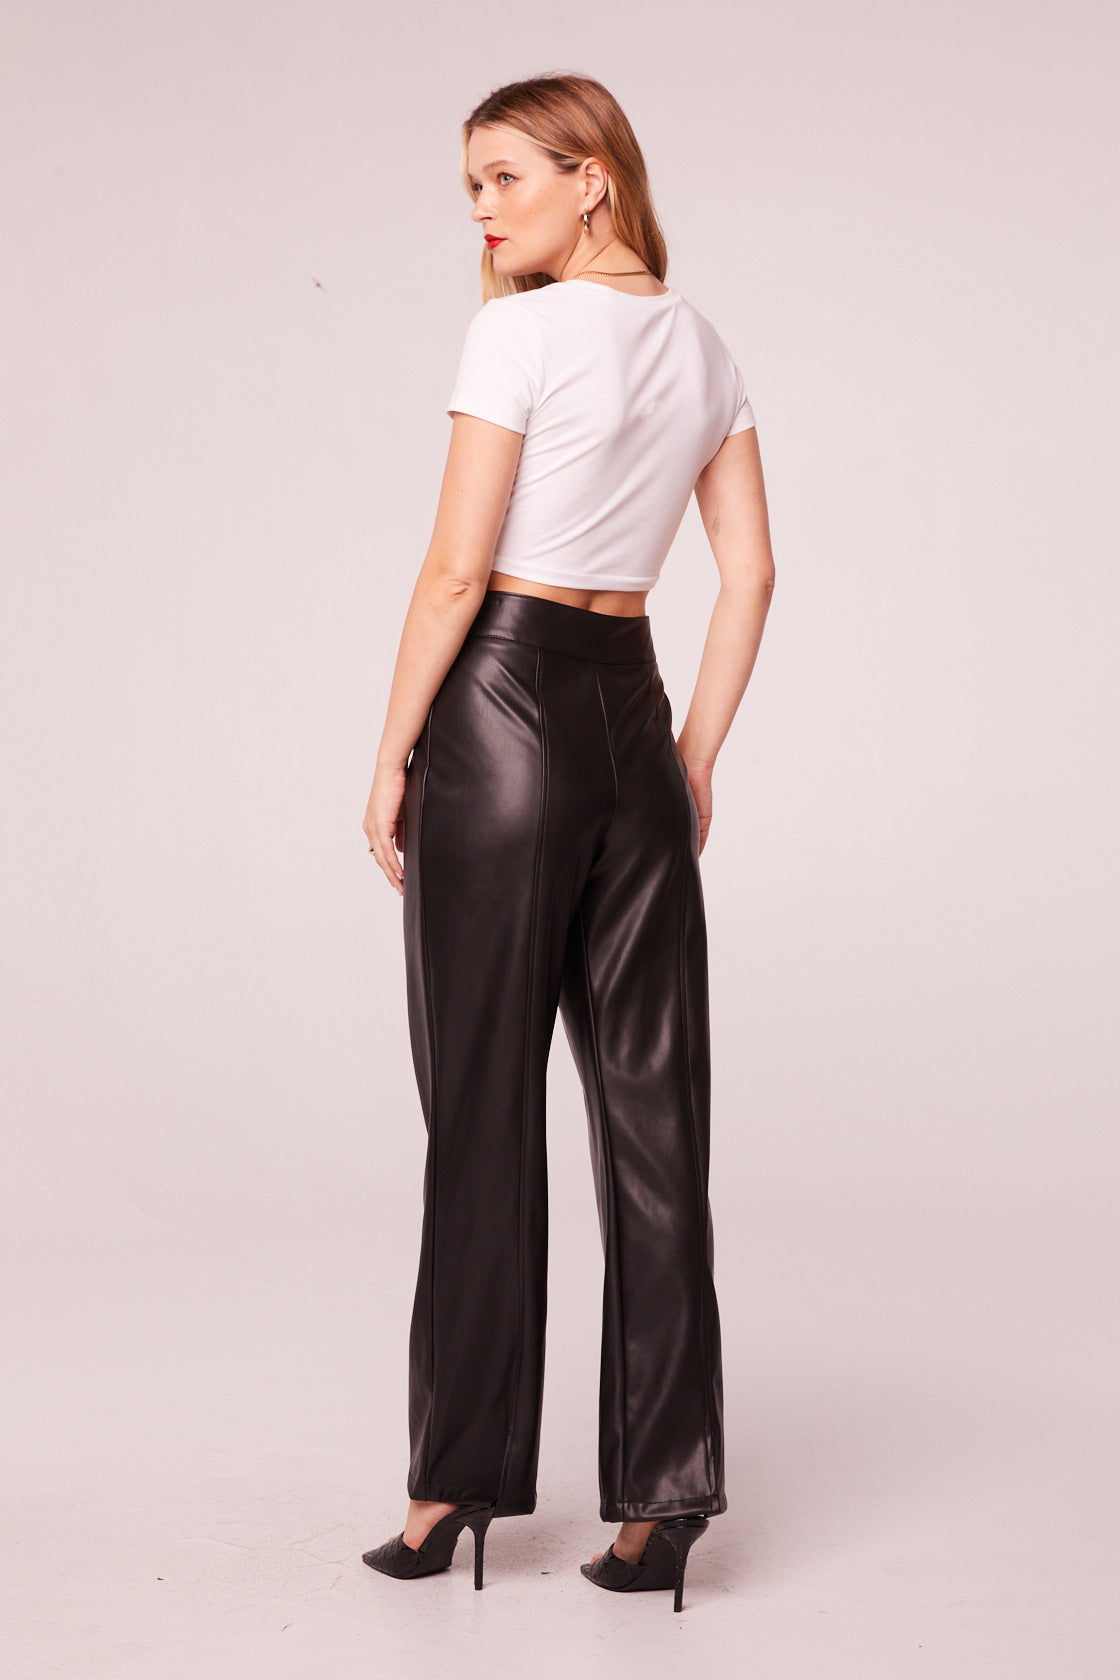 Rock Goddess Black Faux Leather Pants - band of the free